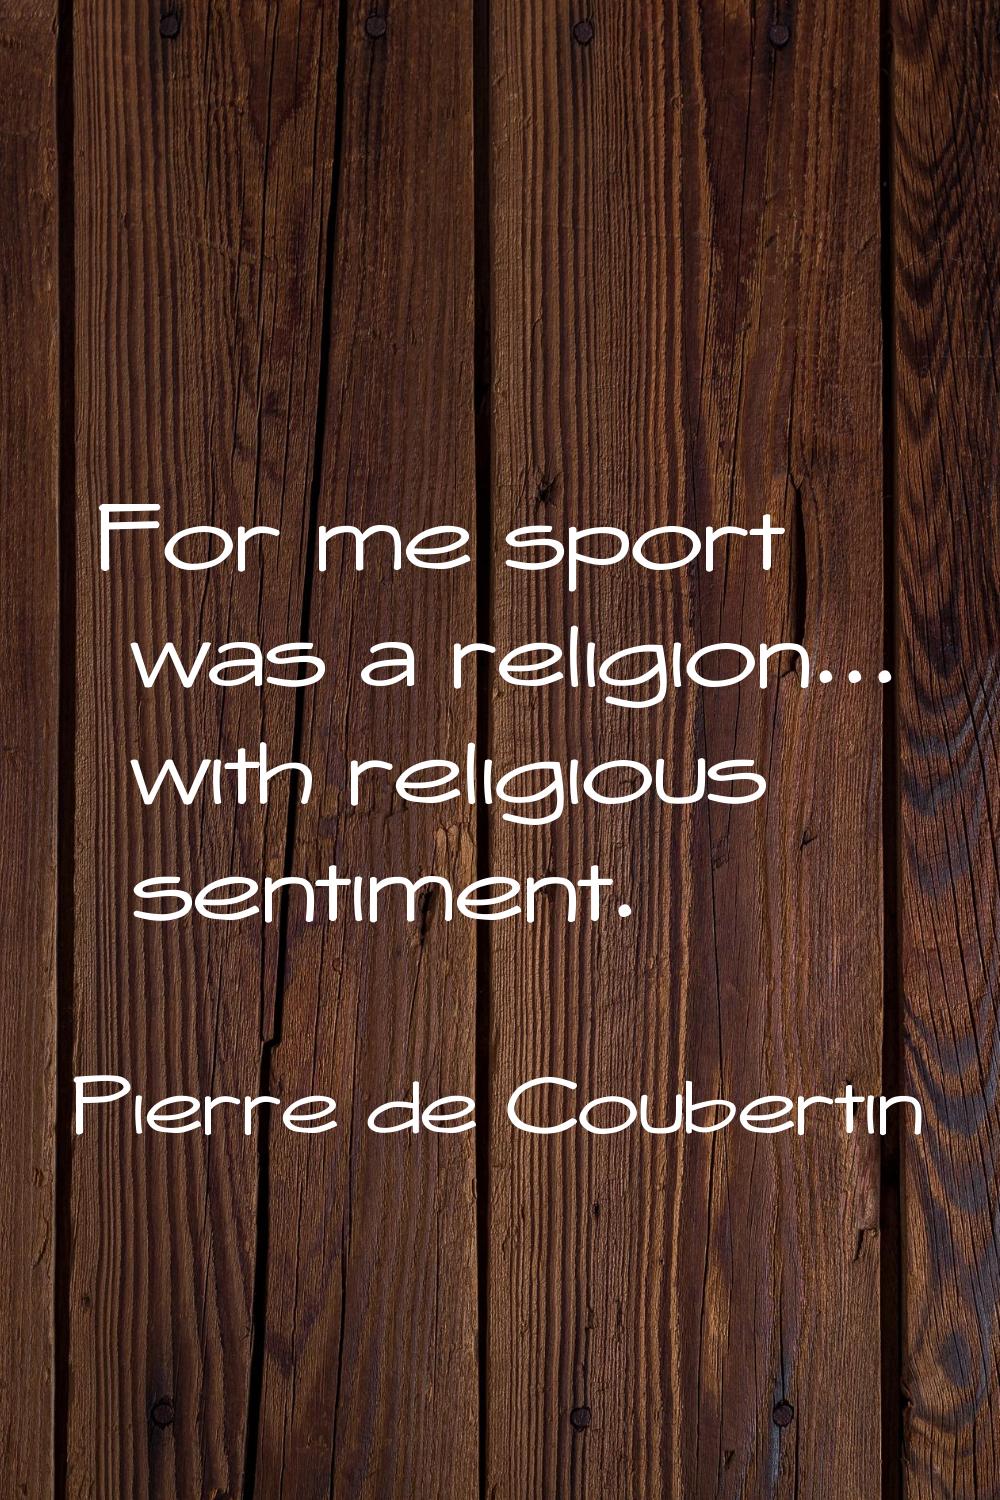 For me sport was a religion... with religious sentiment.